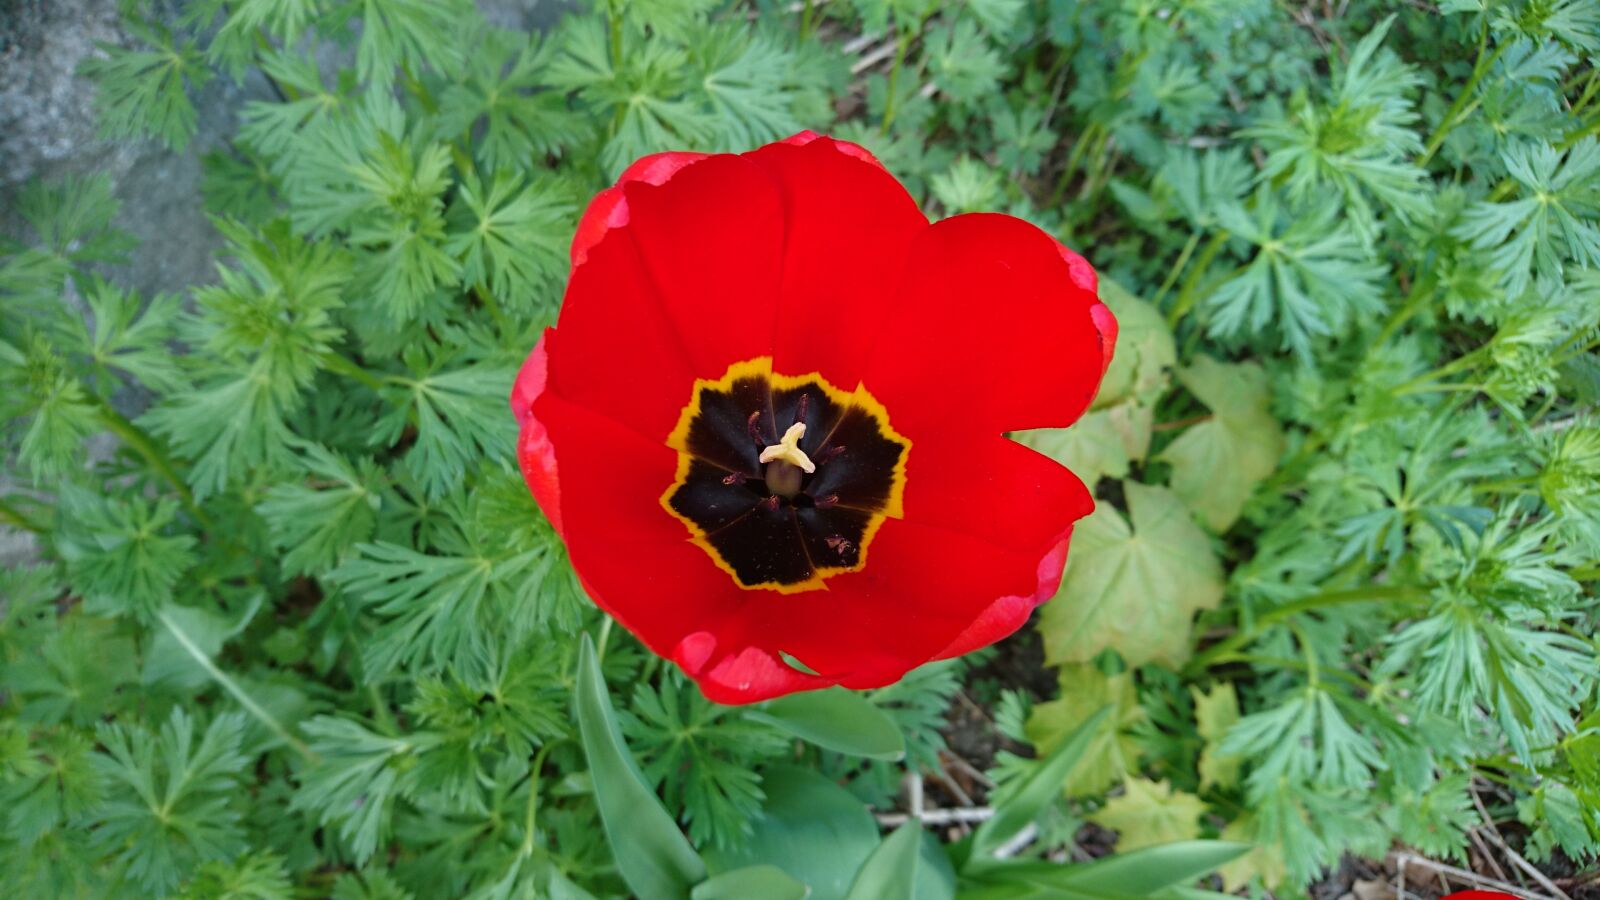 Sony Xperia Z5 Compact sample photo. Tulip, red tulip, flower photography